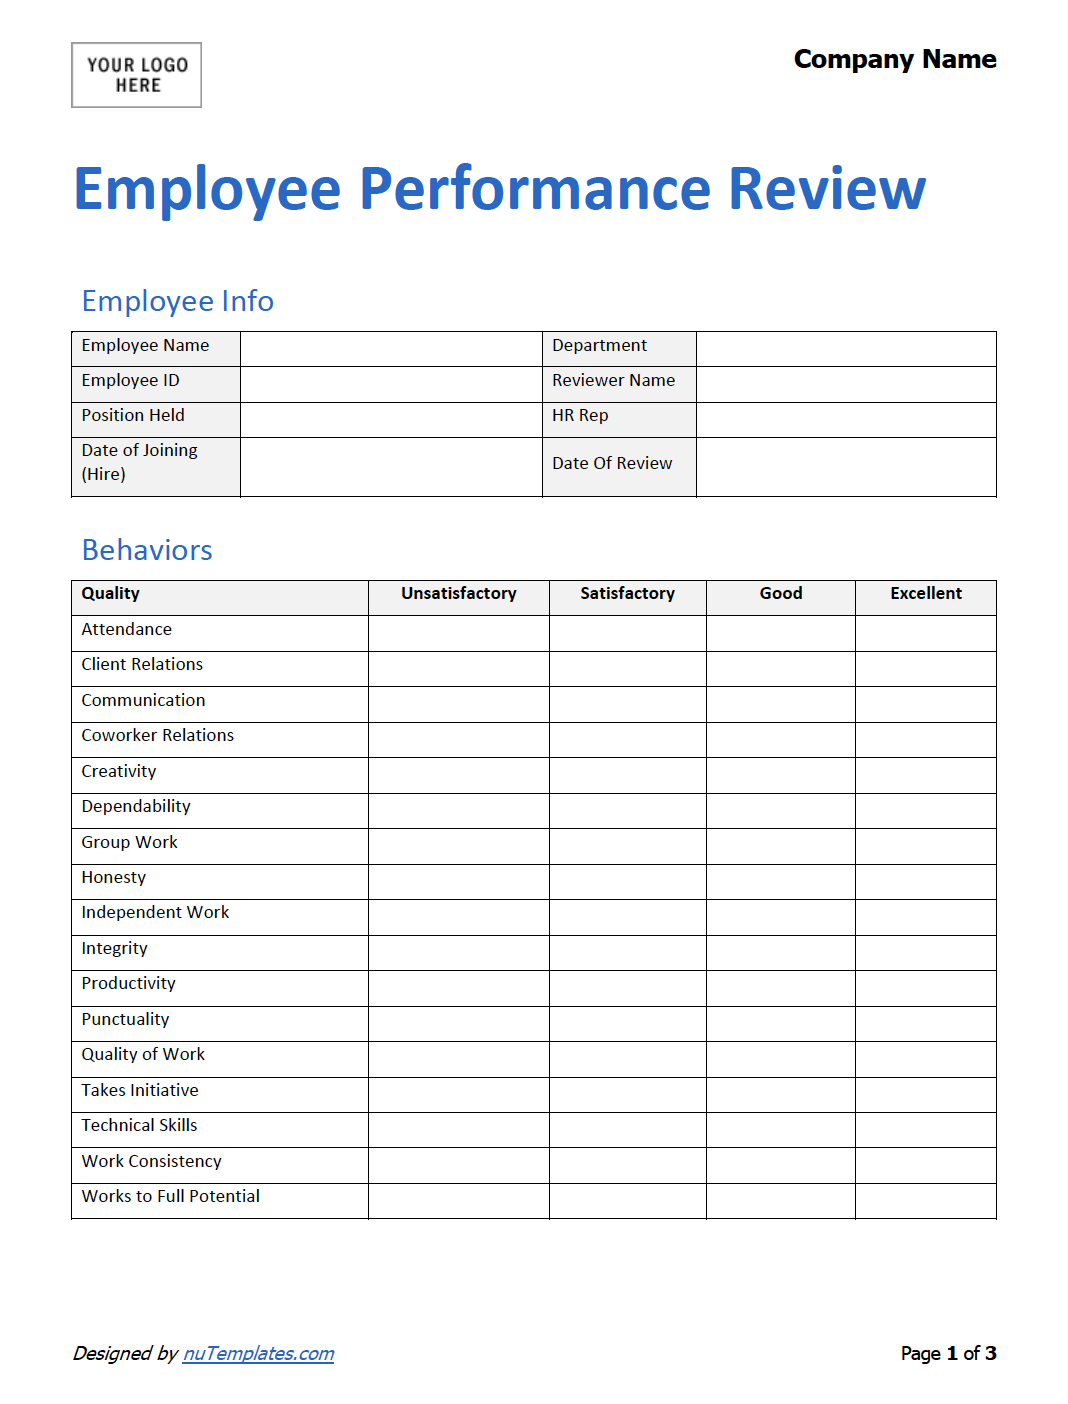 employee-performance-review-template-pdf